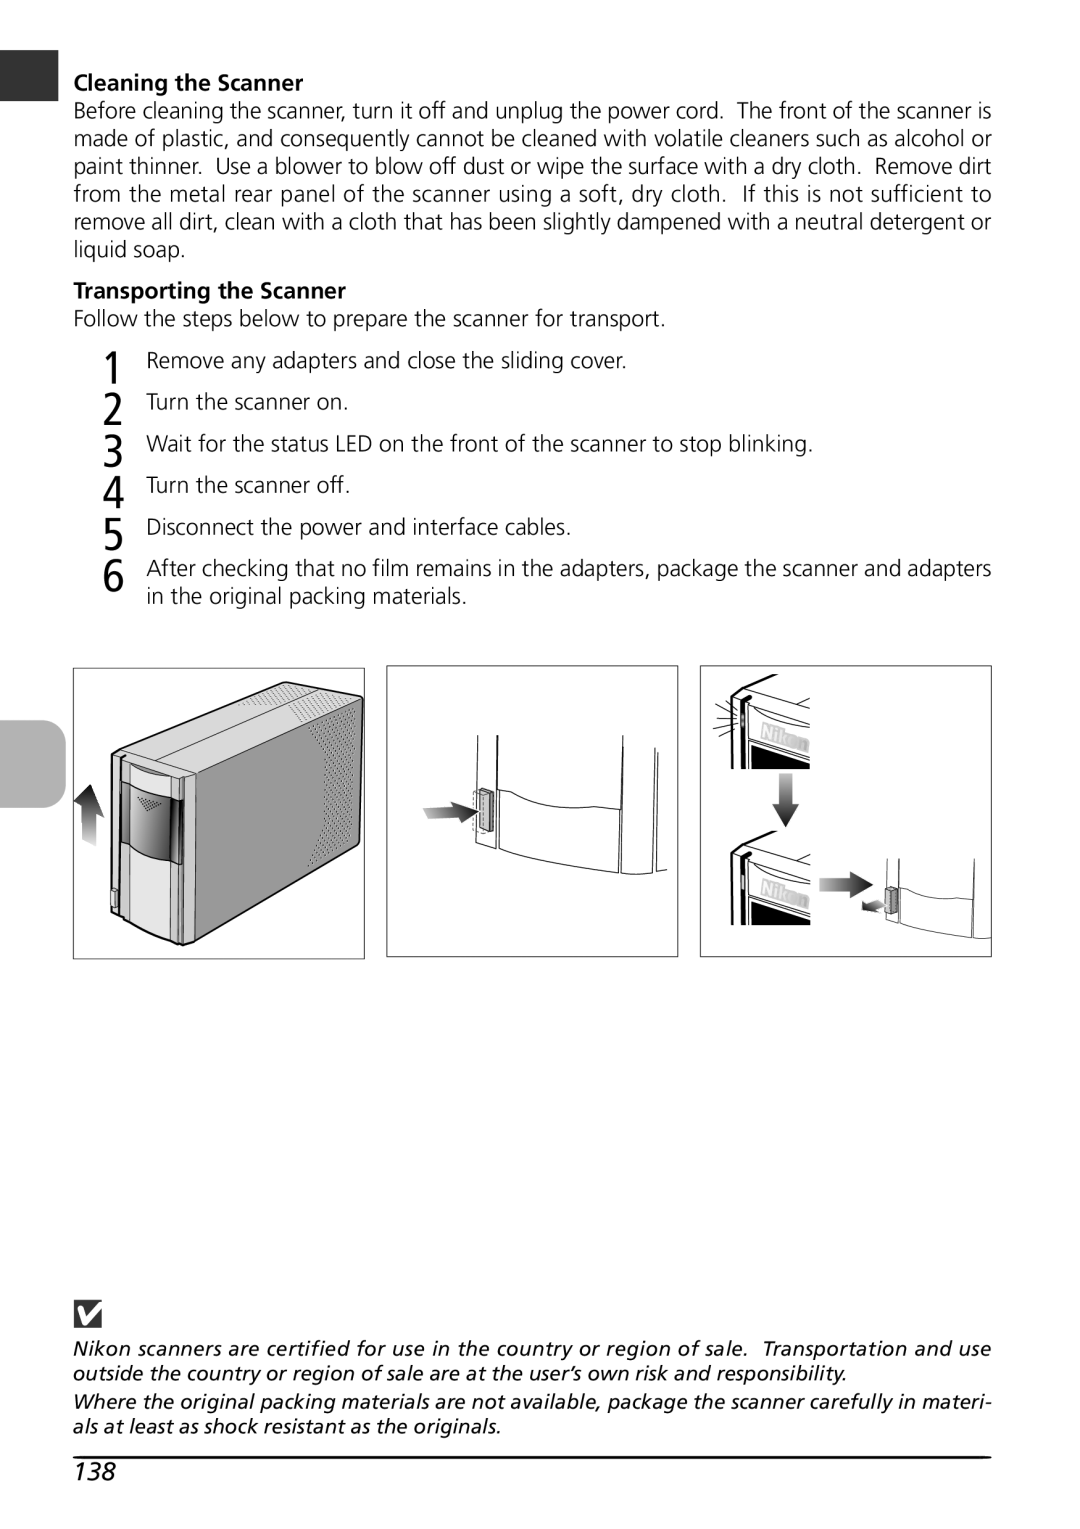 Nikon LS4000 user manual Cleaning the Scanner, Transporting the Scanner 